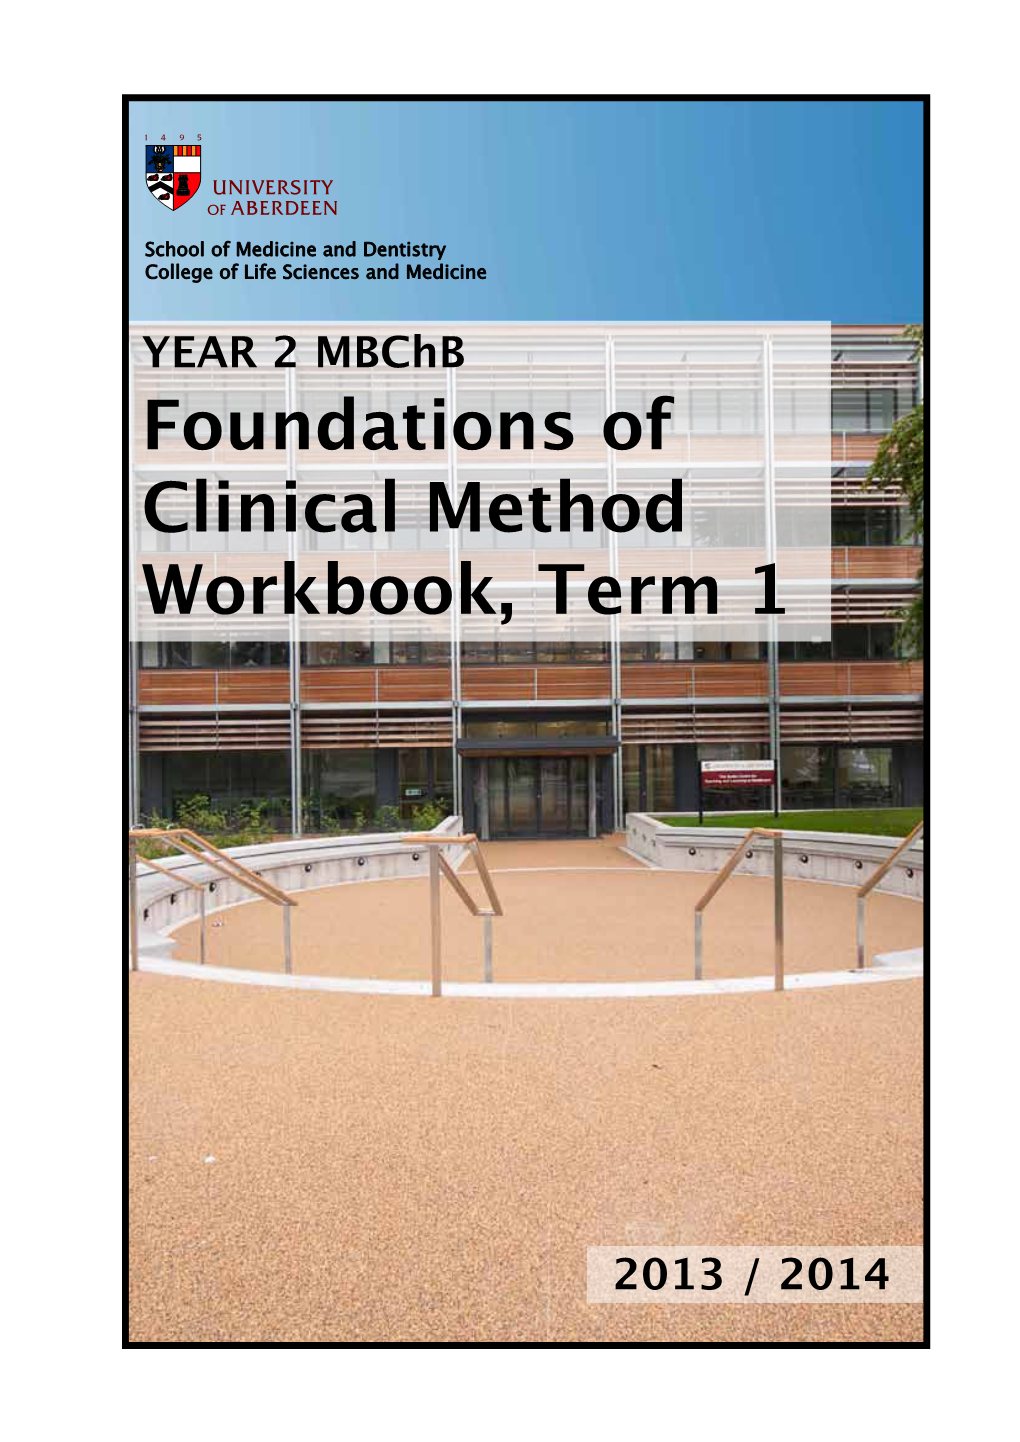 Foundations of Clinical Method Workbook, Term 1